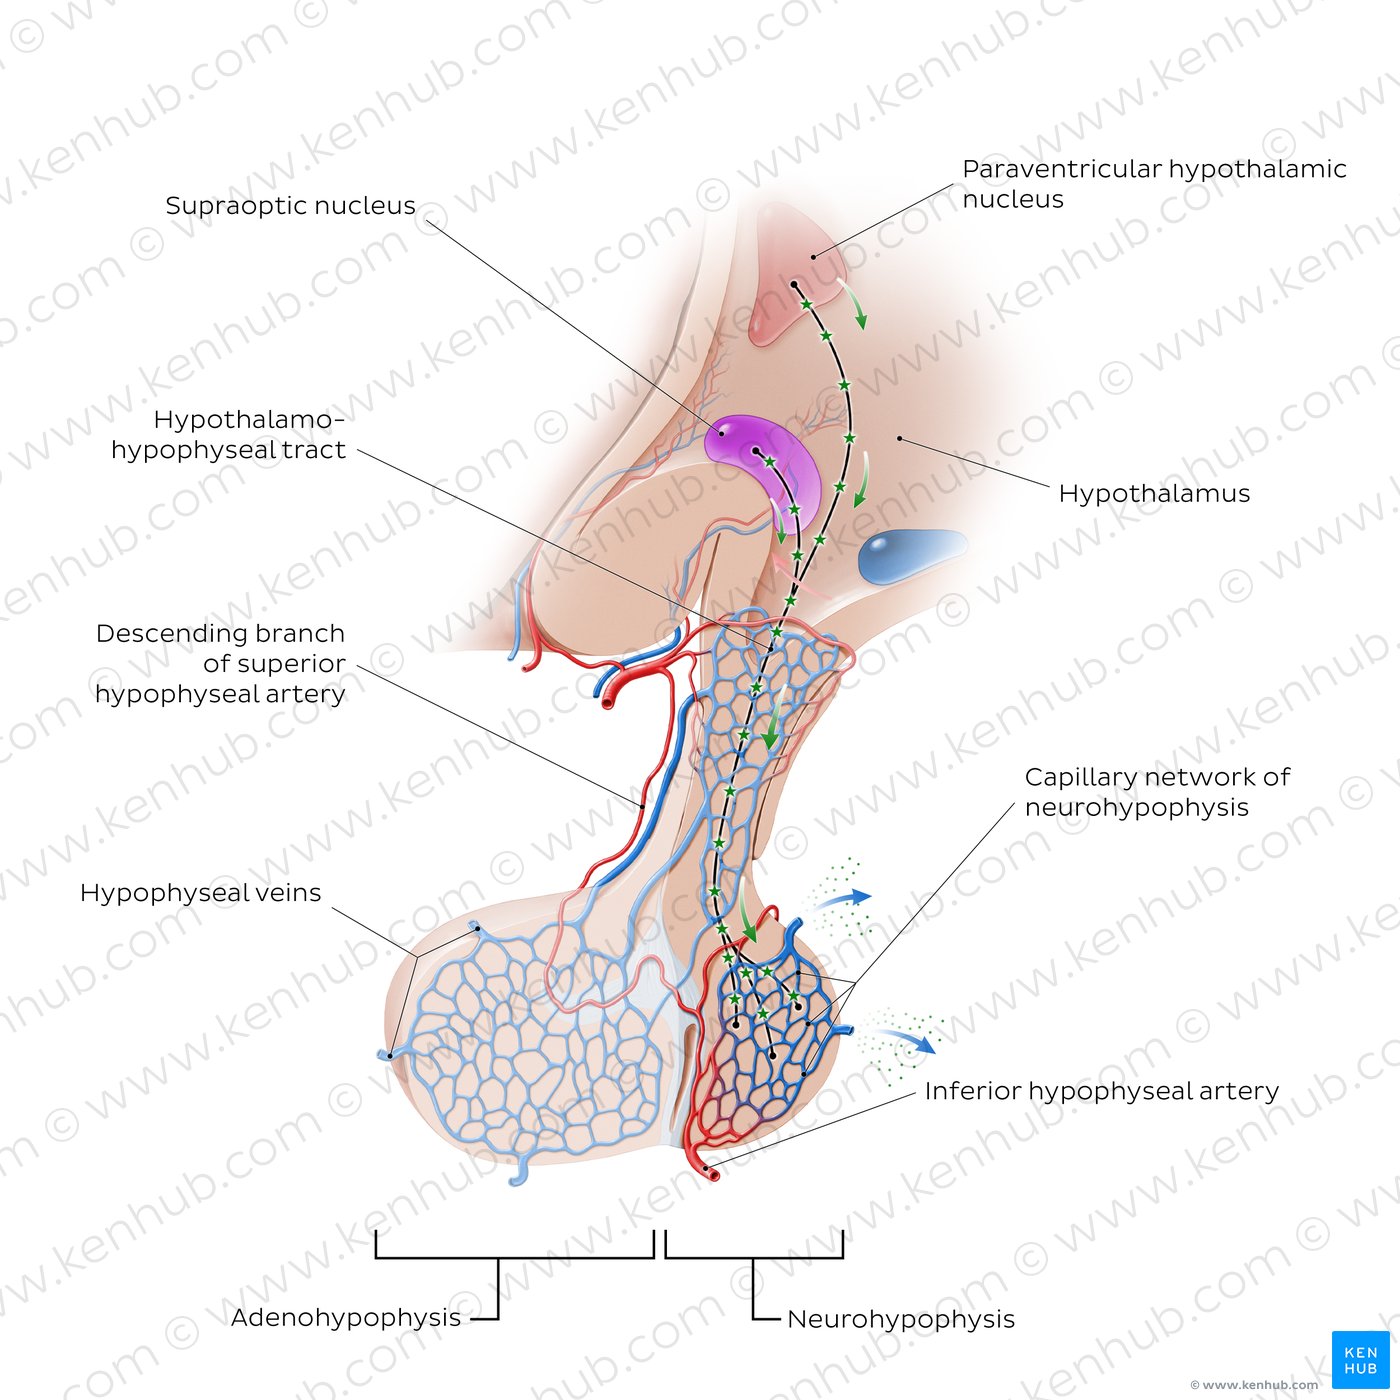 Hypothalamohypophyseal tract: Overview